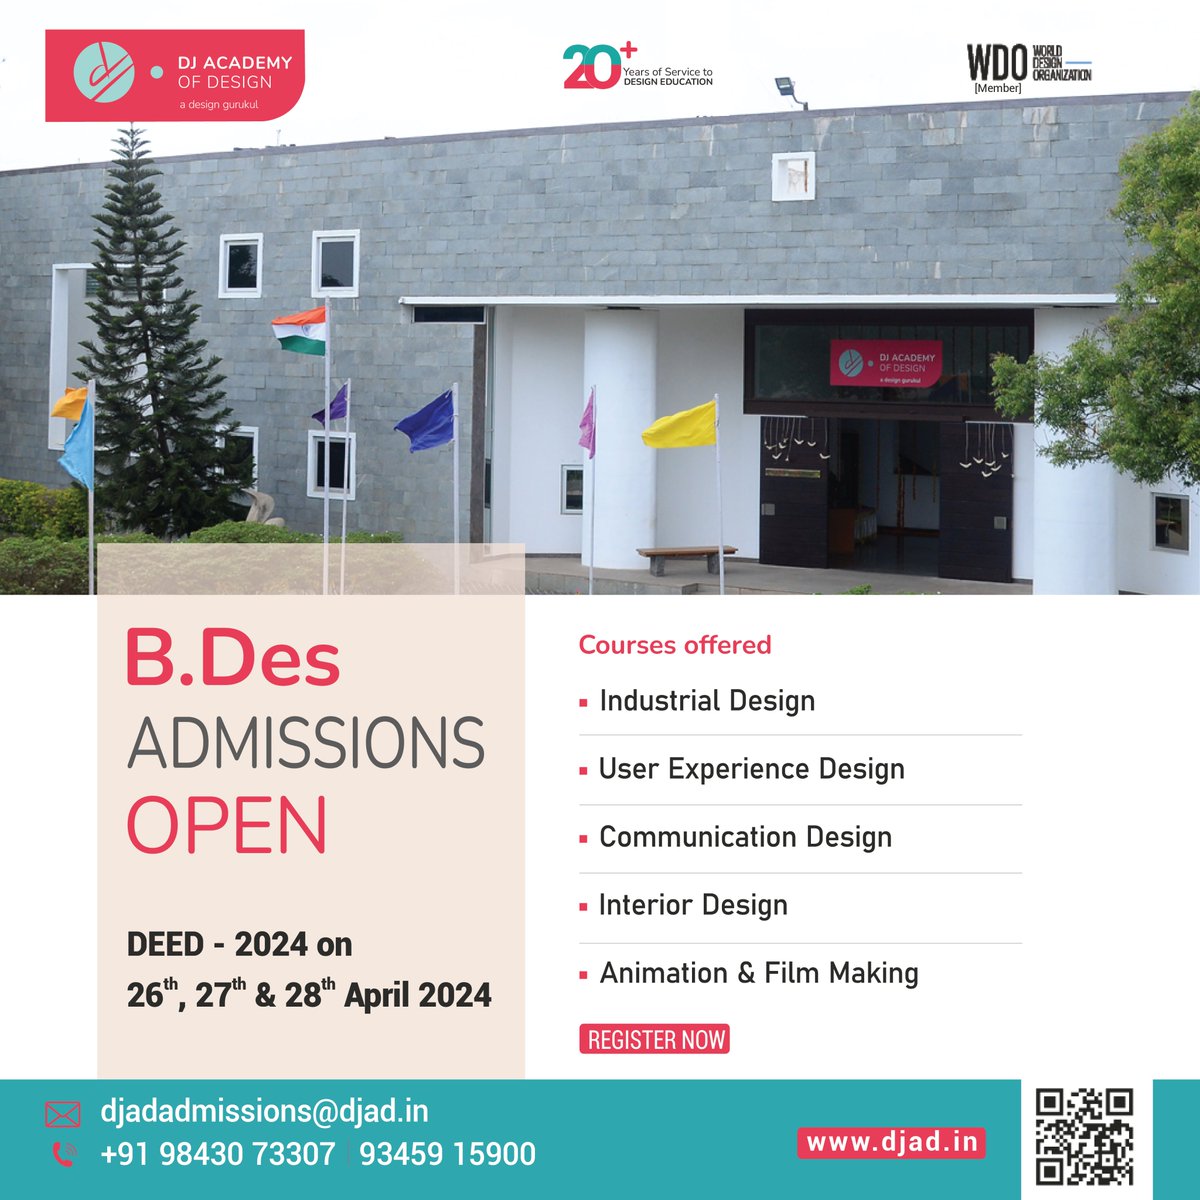 Join us at DJAD for the 2024 admissions! 🎉 Don't miss the Online Entrance Exam from April 26th to 28th, 2024. Apply now to reserve your spot! #DJAD #AdmissionsOpen #DesignEducation #EntranceExam